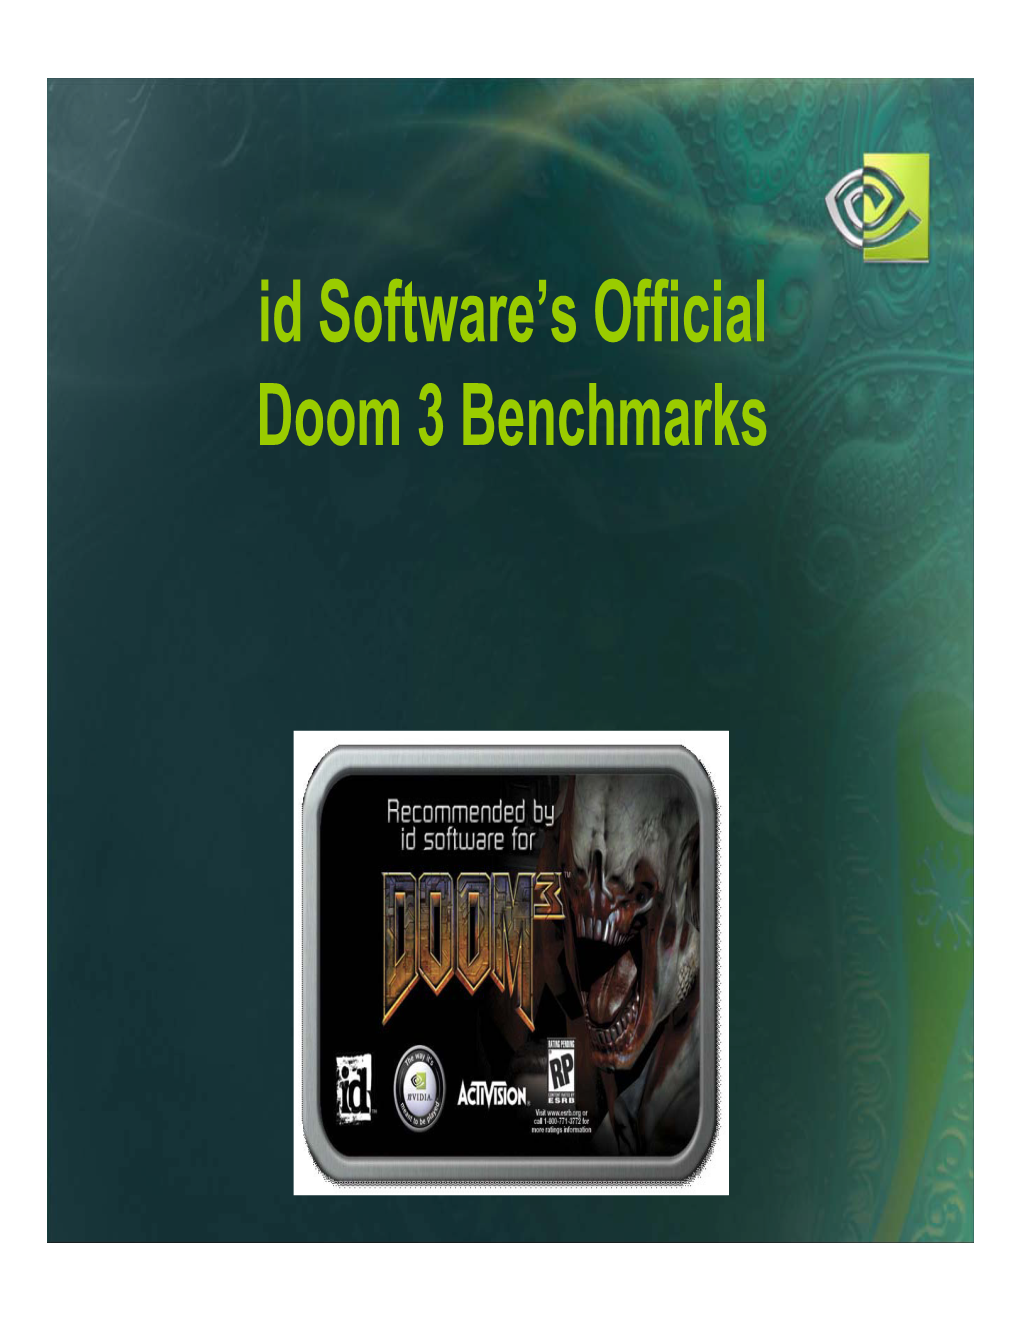 Id Software's Official Doom 3 Benchmarks